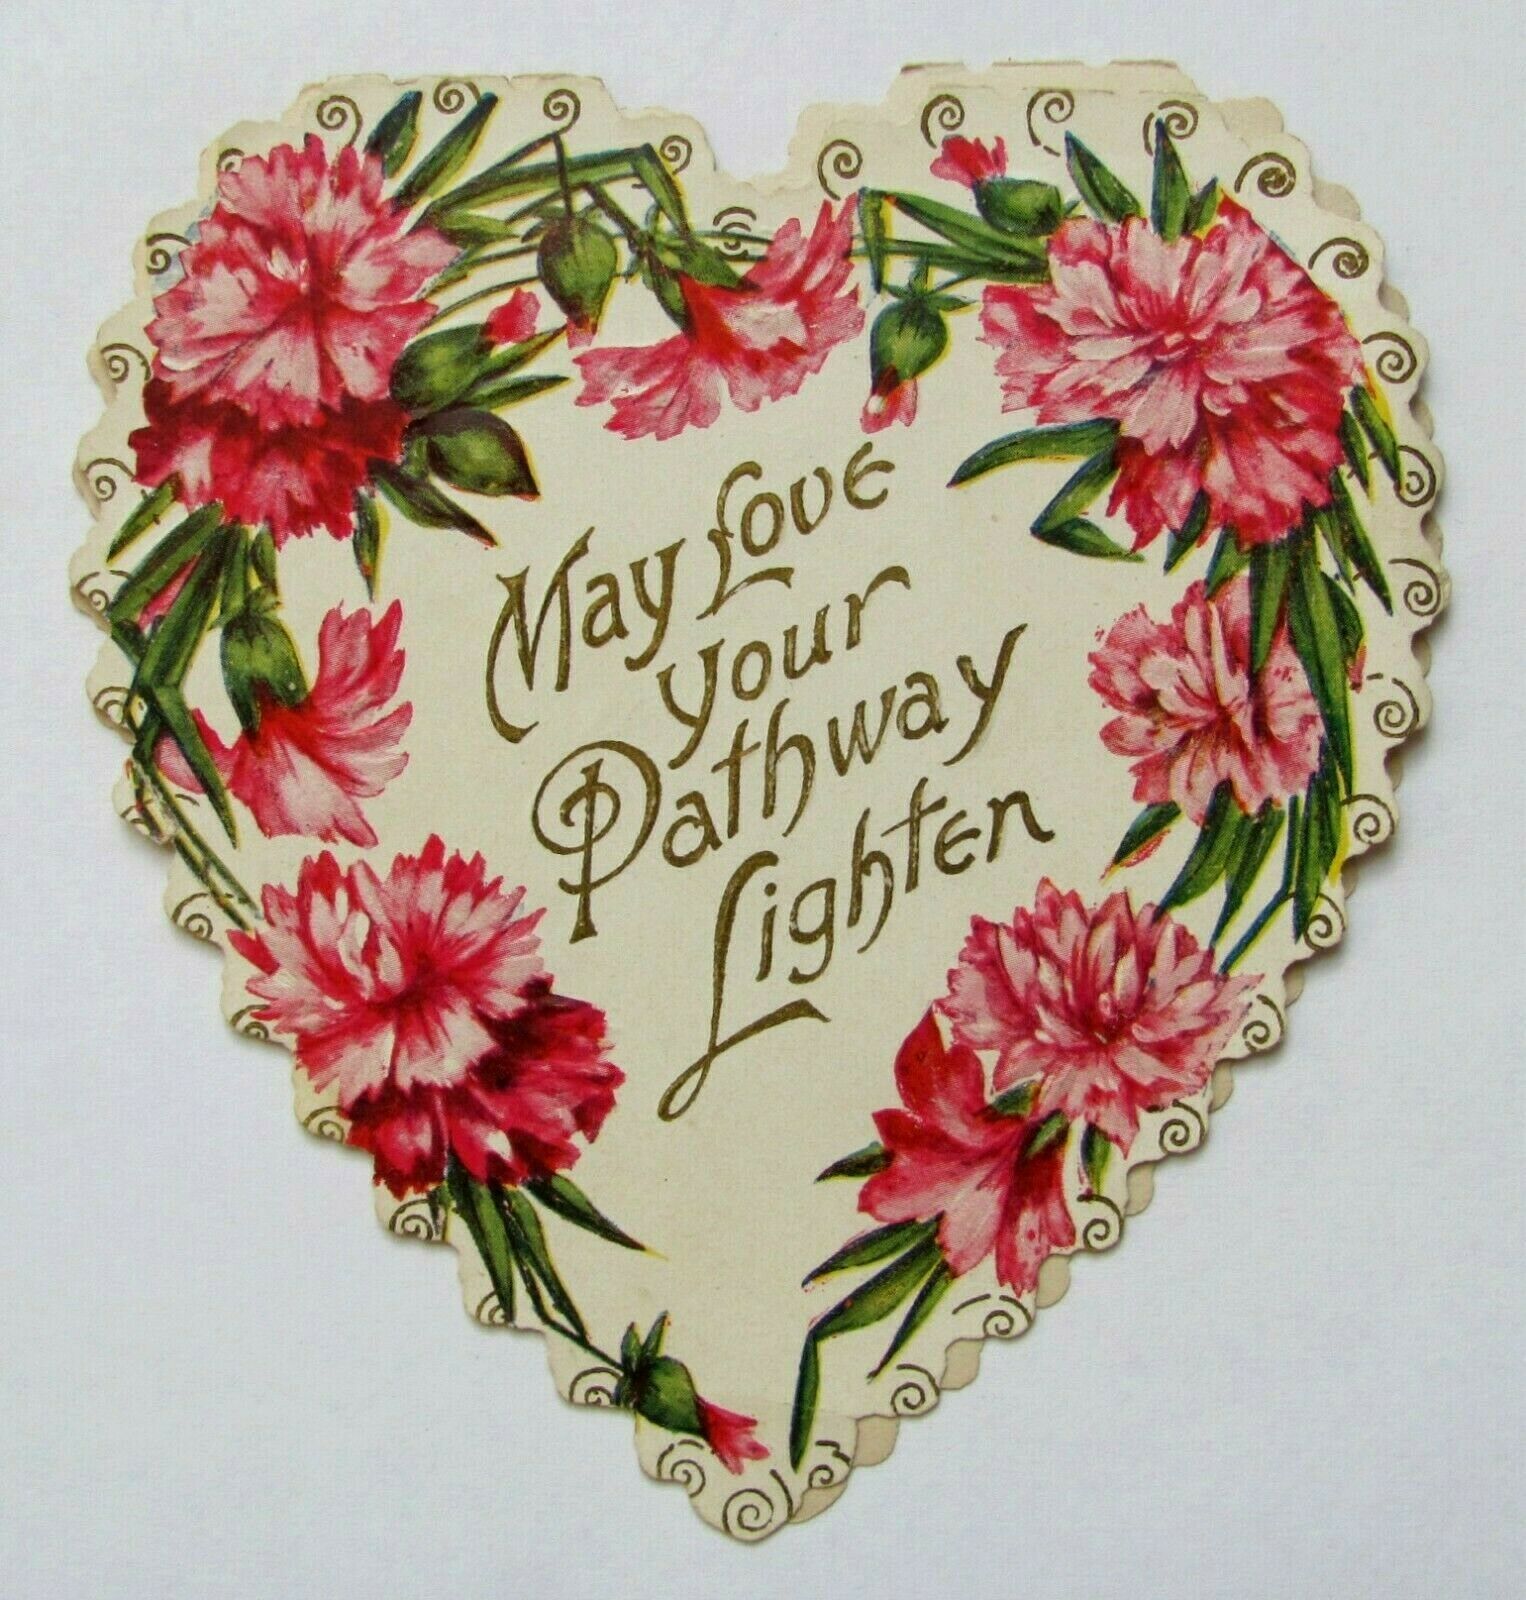 Victorian Holiday Card: Valentine - Die-cut Heart With Pink & Red Carnations